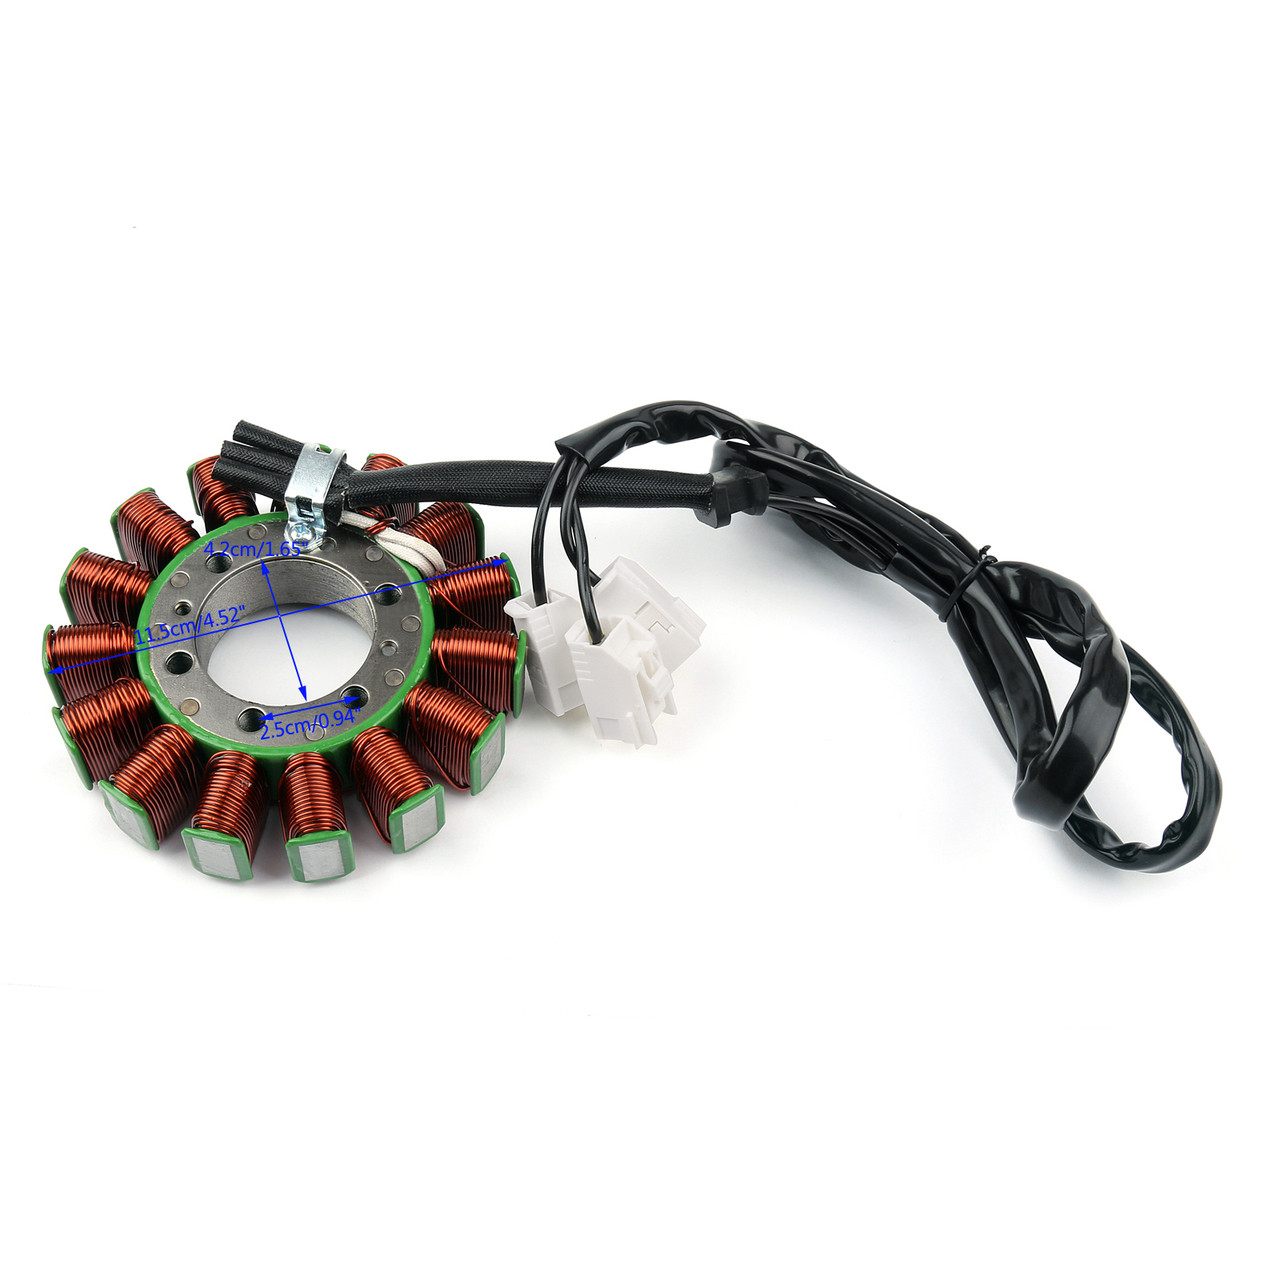 Generator Stator Coil For Kawasaki ZG1400 1400GTR ABS (08-16) ZG1400 Concours 14 ABS (08-17)